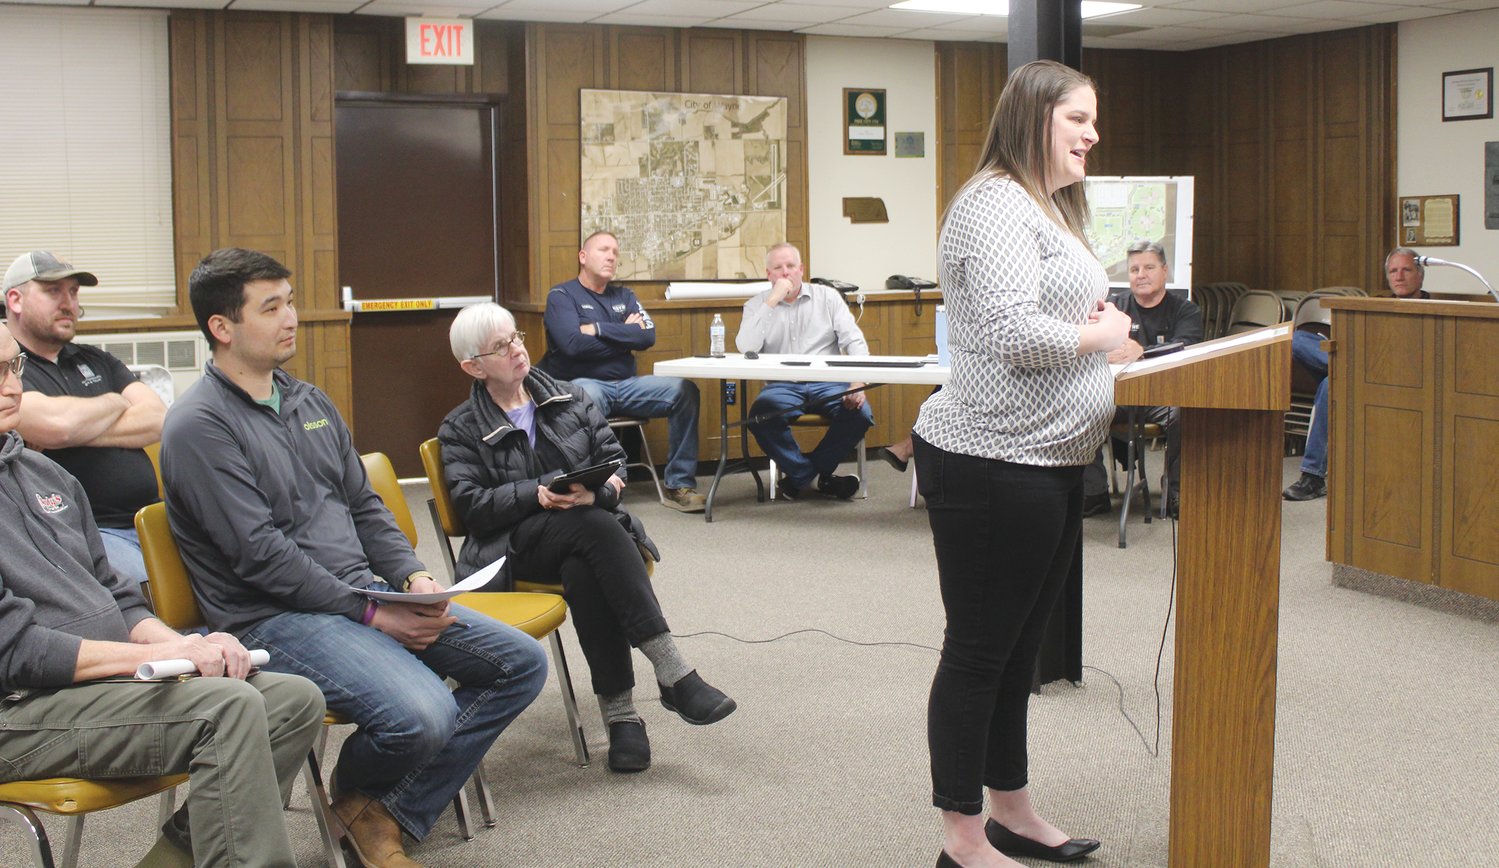 Katelyn Broders discussed her plans for a flower and gift shop during Tuesday's meeting of the Wayne City Council.